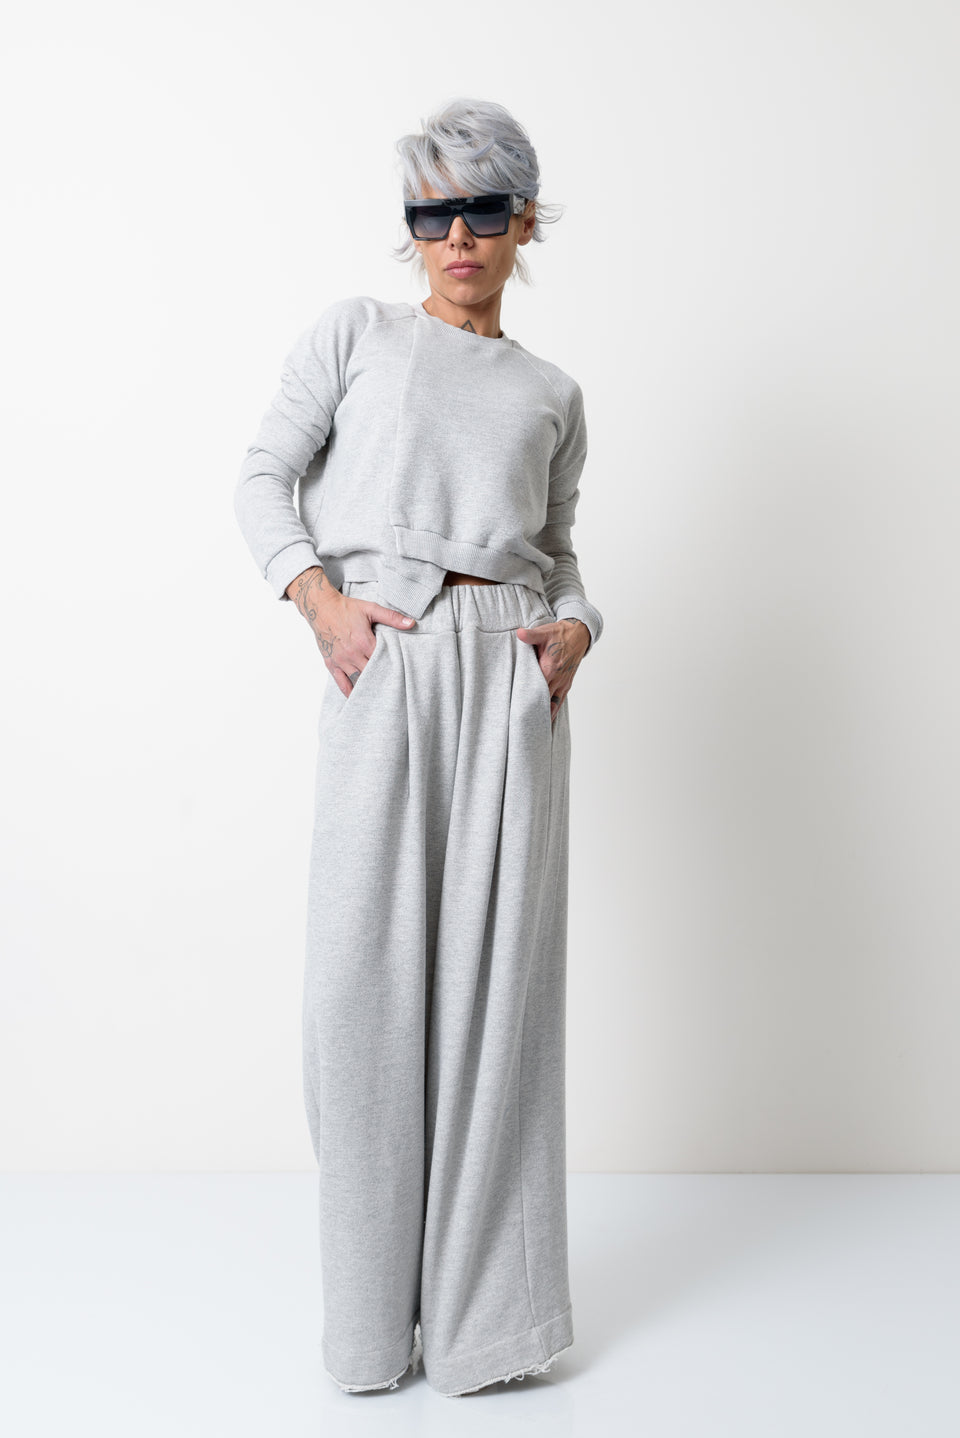 GREY TWO PIECE TRACKSUIT SET FOR WOMEN